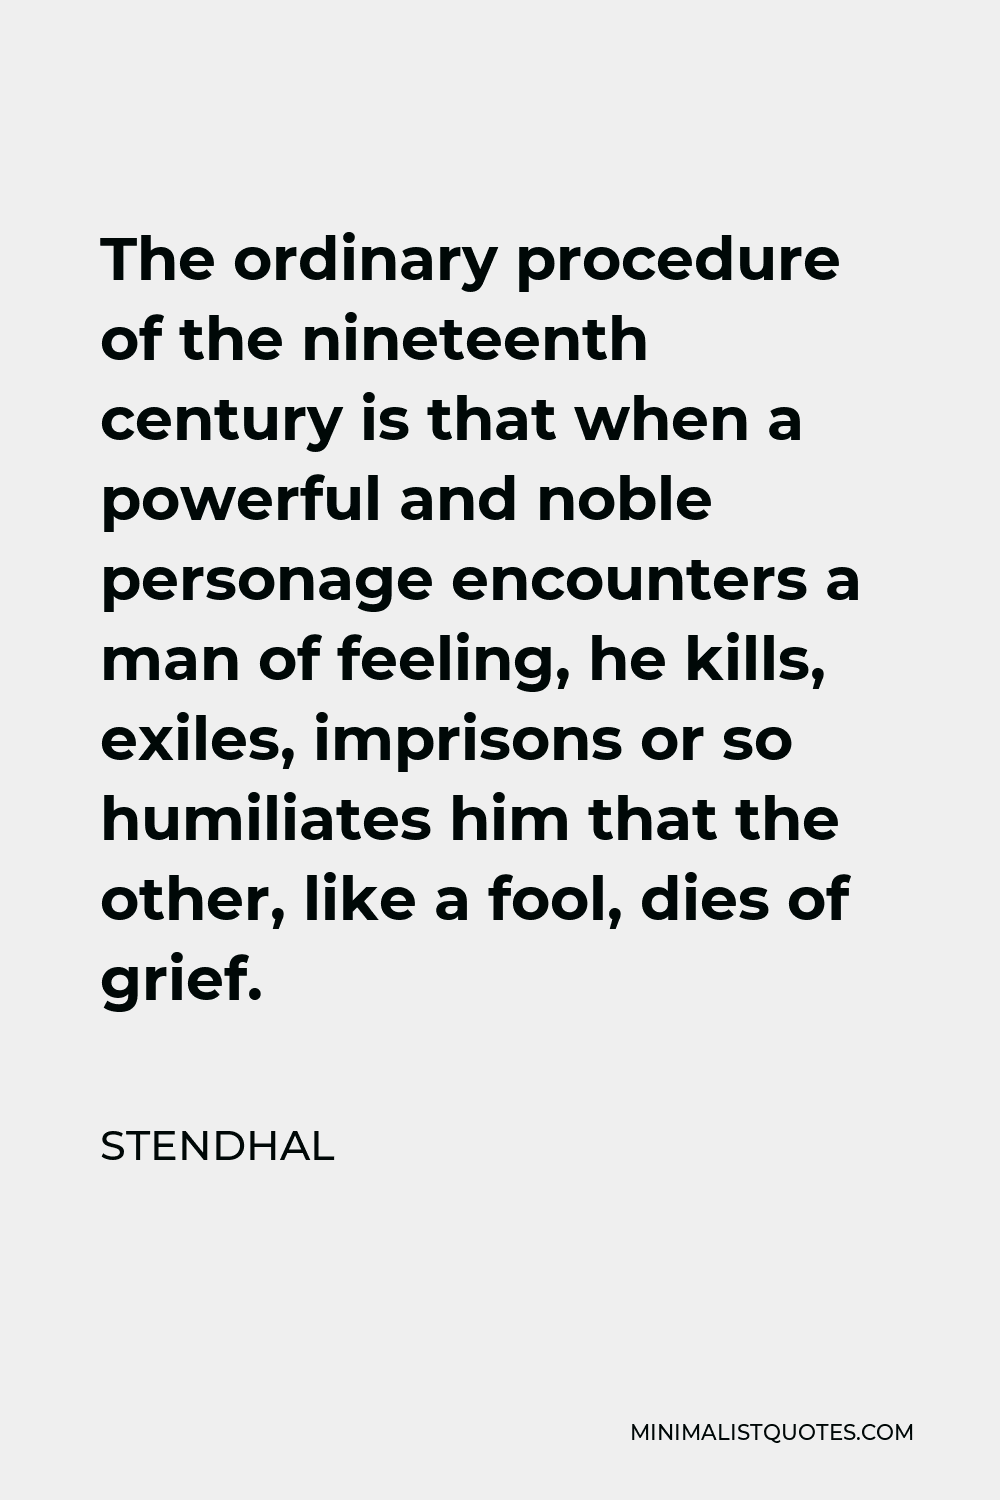 Stendhal Quote - The ordinary procedure of the nineteenth century is that when a powerful and noble personage encounters a man of feeling, he kills, exiles, imprisons or so humiliates him that the other, like a fool, dies of grief.